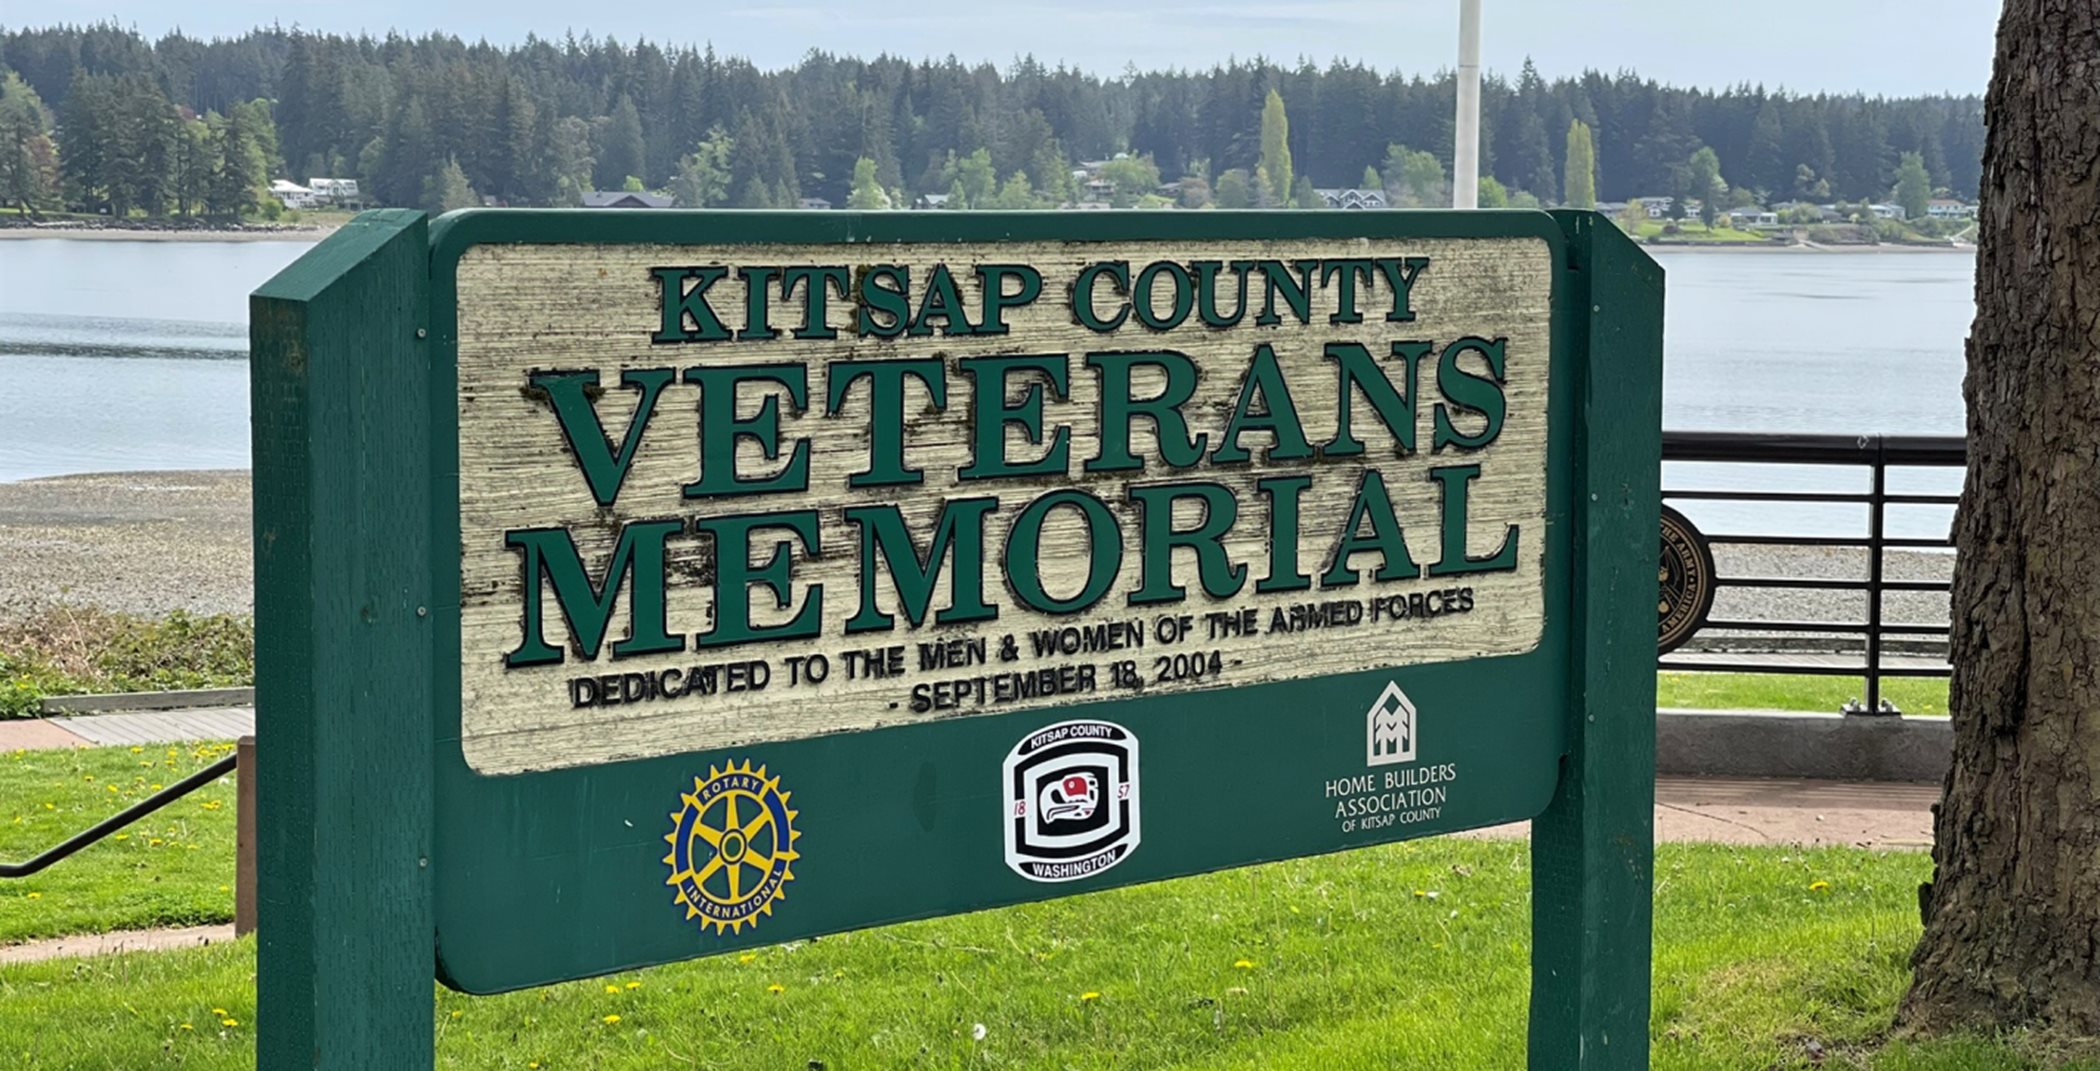 Veteran's Memorial Park sign. It is green and yellow. It says: "Kitsap County Veterans' Memorial. Dedicated to the Men and Women of the Armed Forces. September 18, 2004"